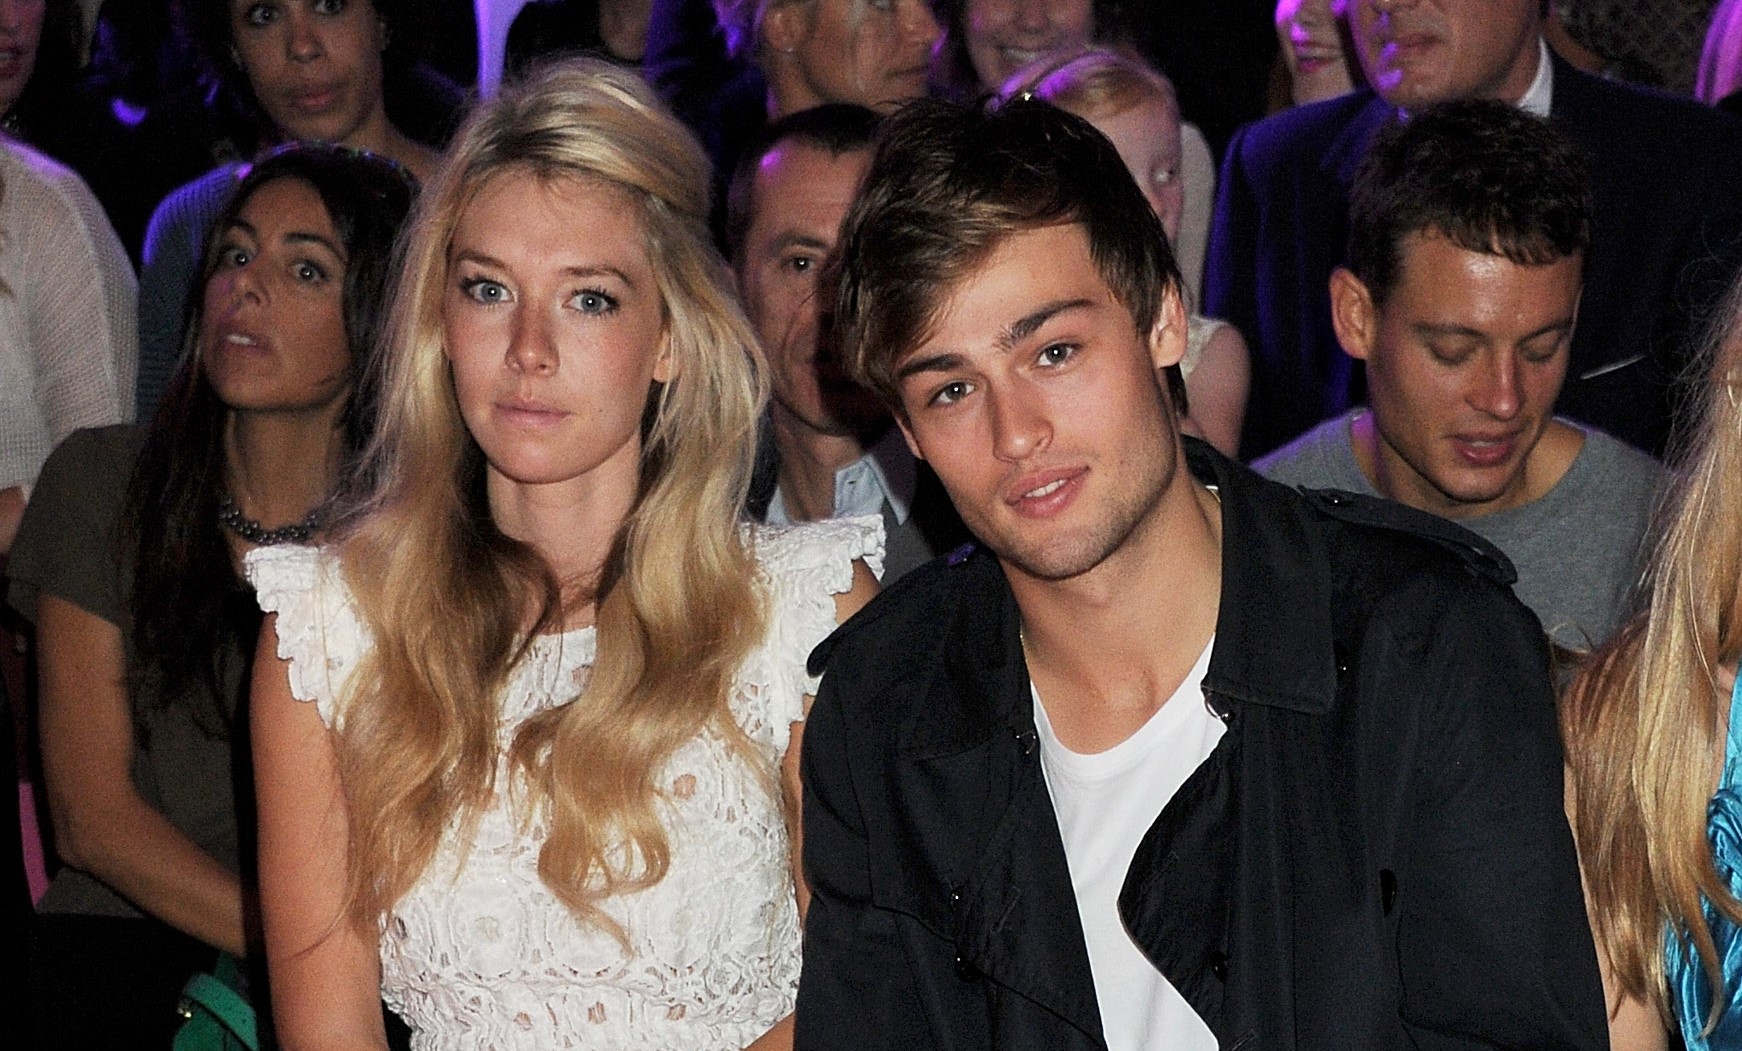 Vanessa Kirby (L) and Douglas Booth sit in the front row at the Mulberry Spring/Summer 2012 runway show during London Fashion Week at Claridges Hotel, on September 18, 2011, in London, England. | Source: Getty Images